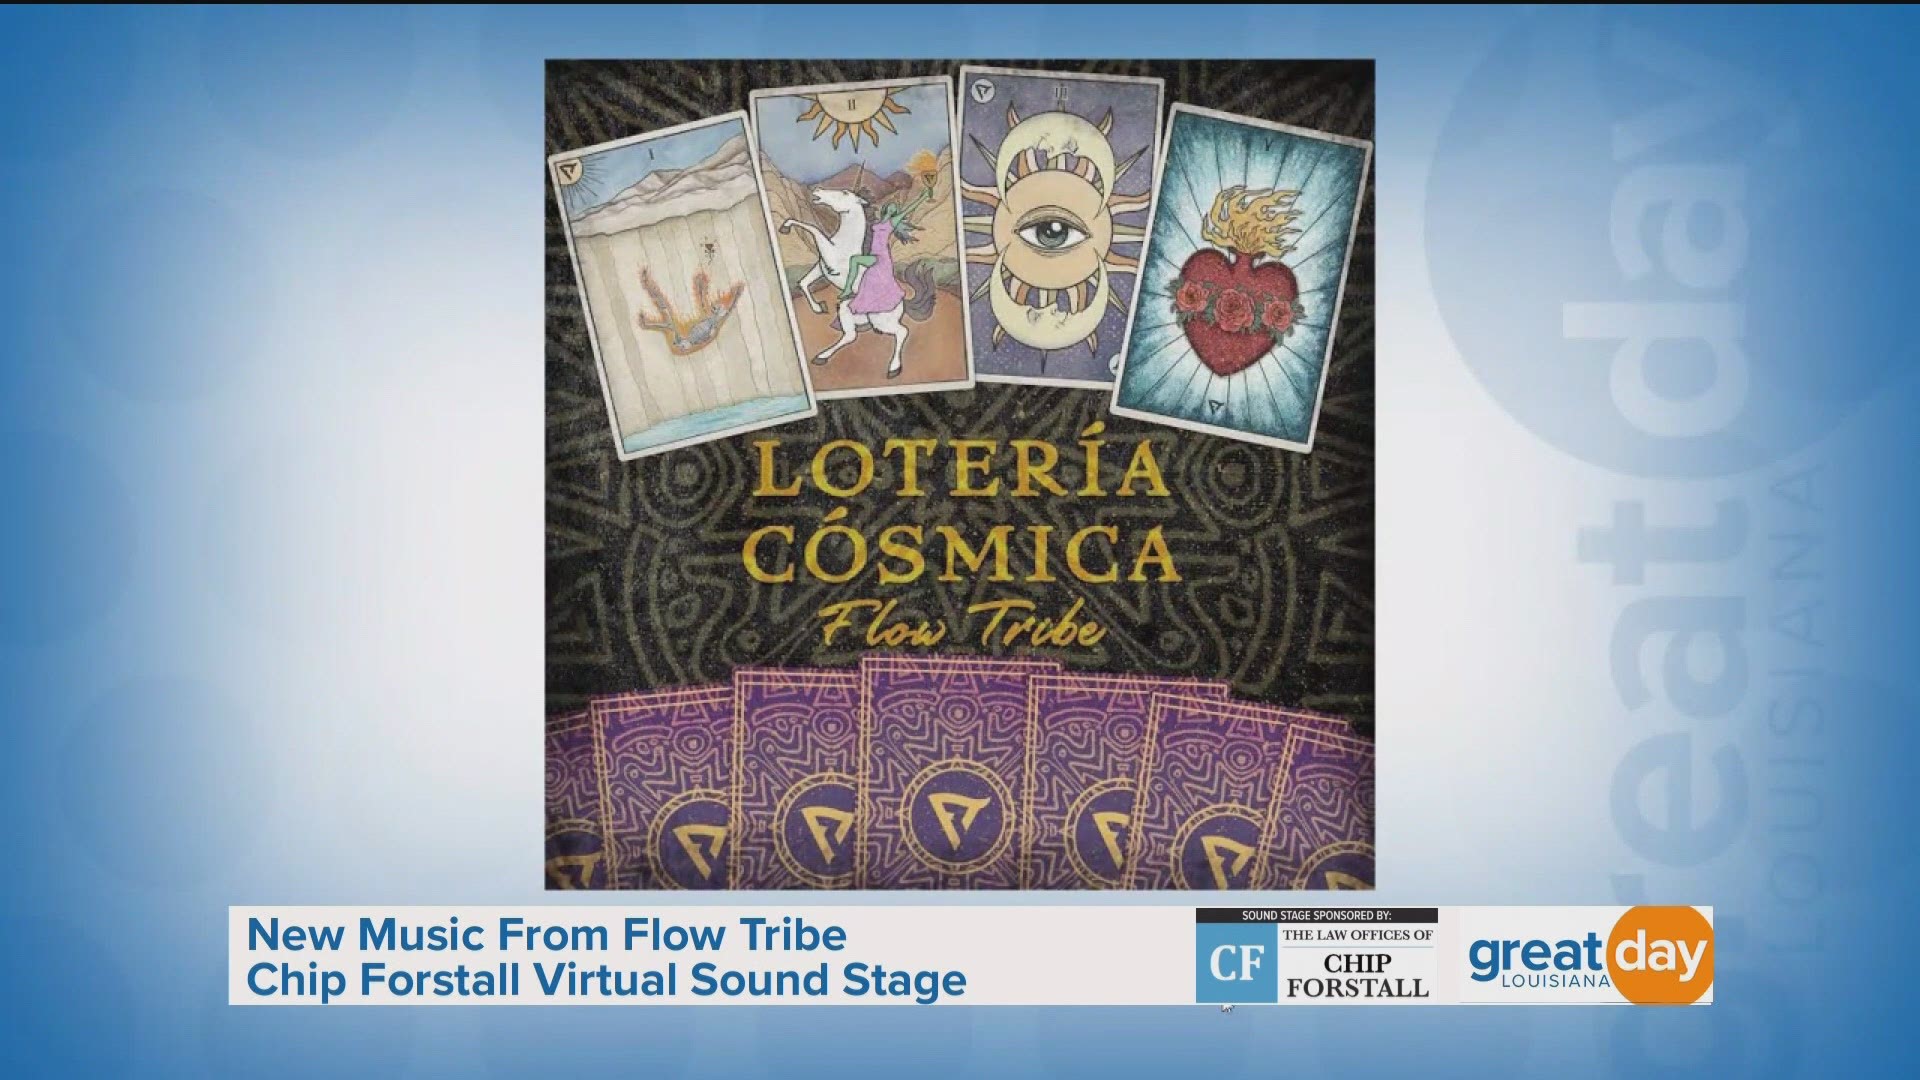 K.C. O'rorke of "Flow Tribe" discussed the band's new album, "Loteria Cosmica."